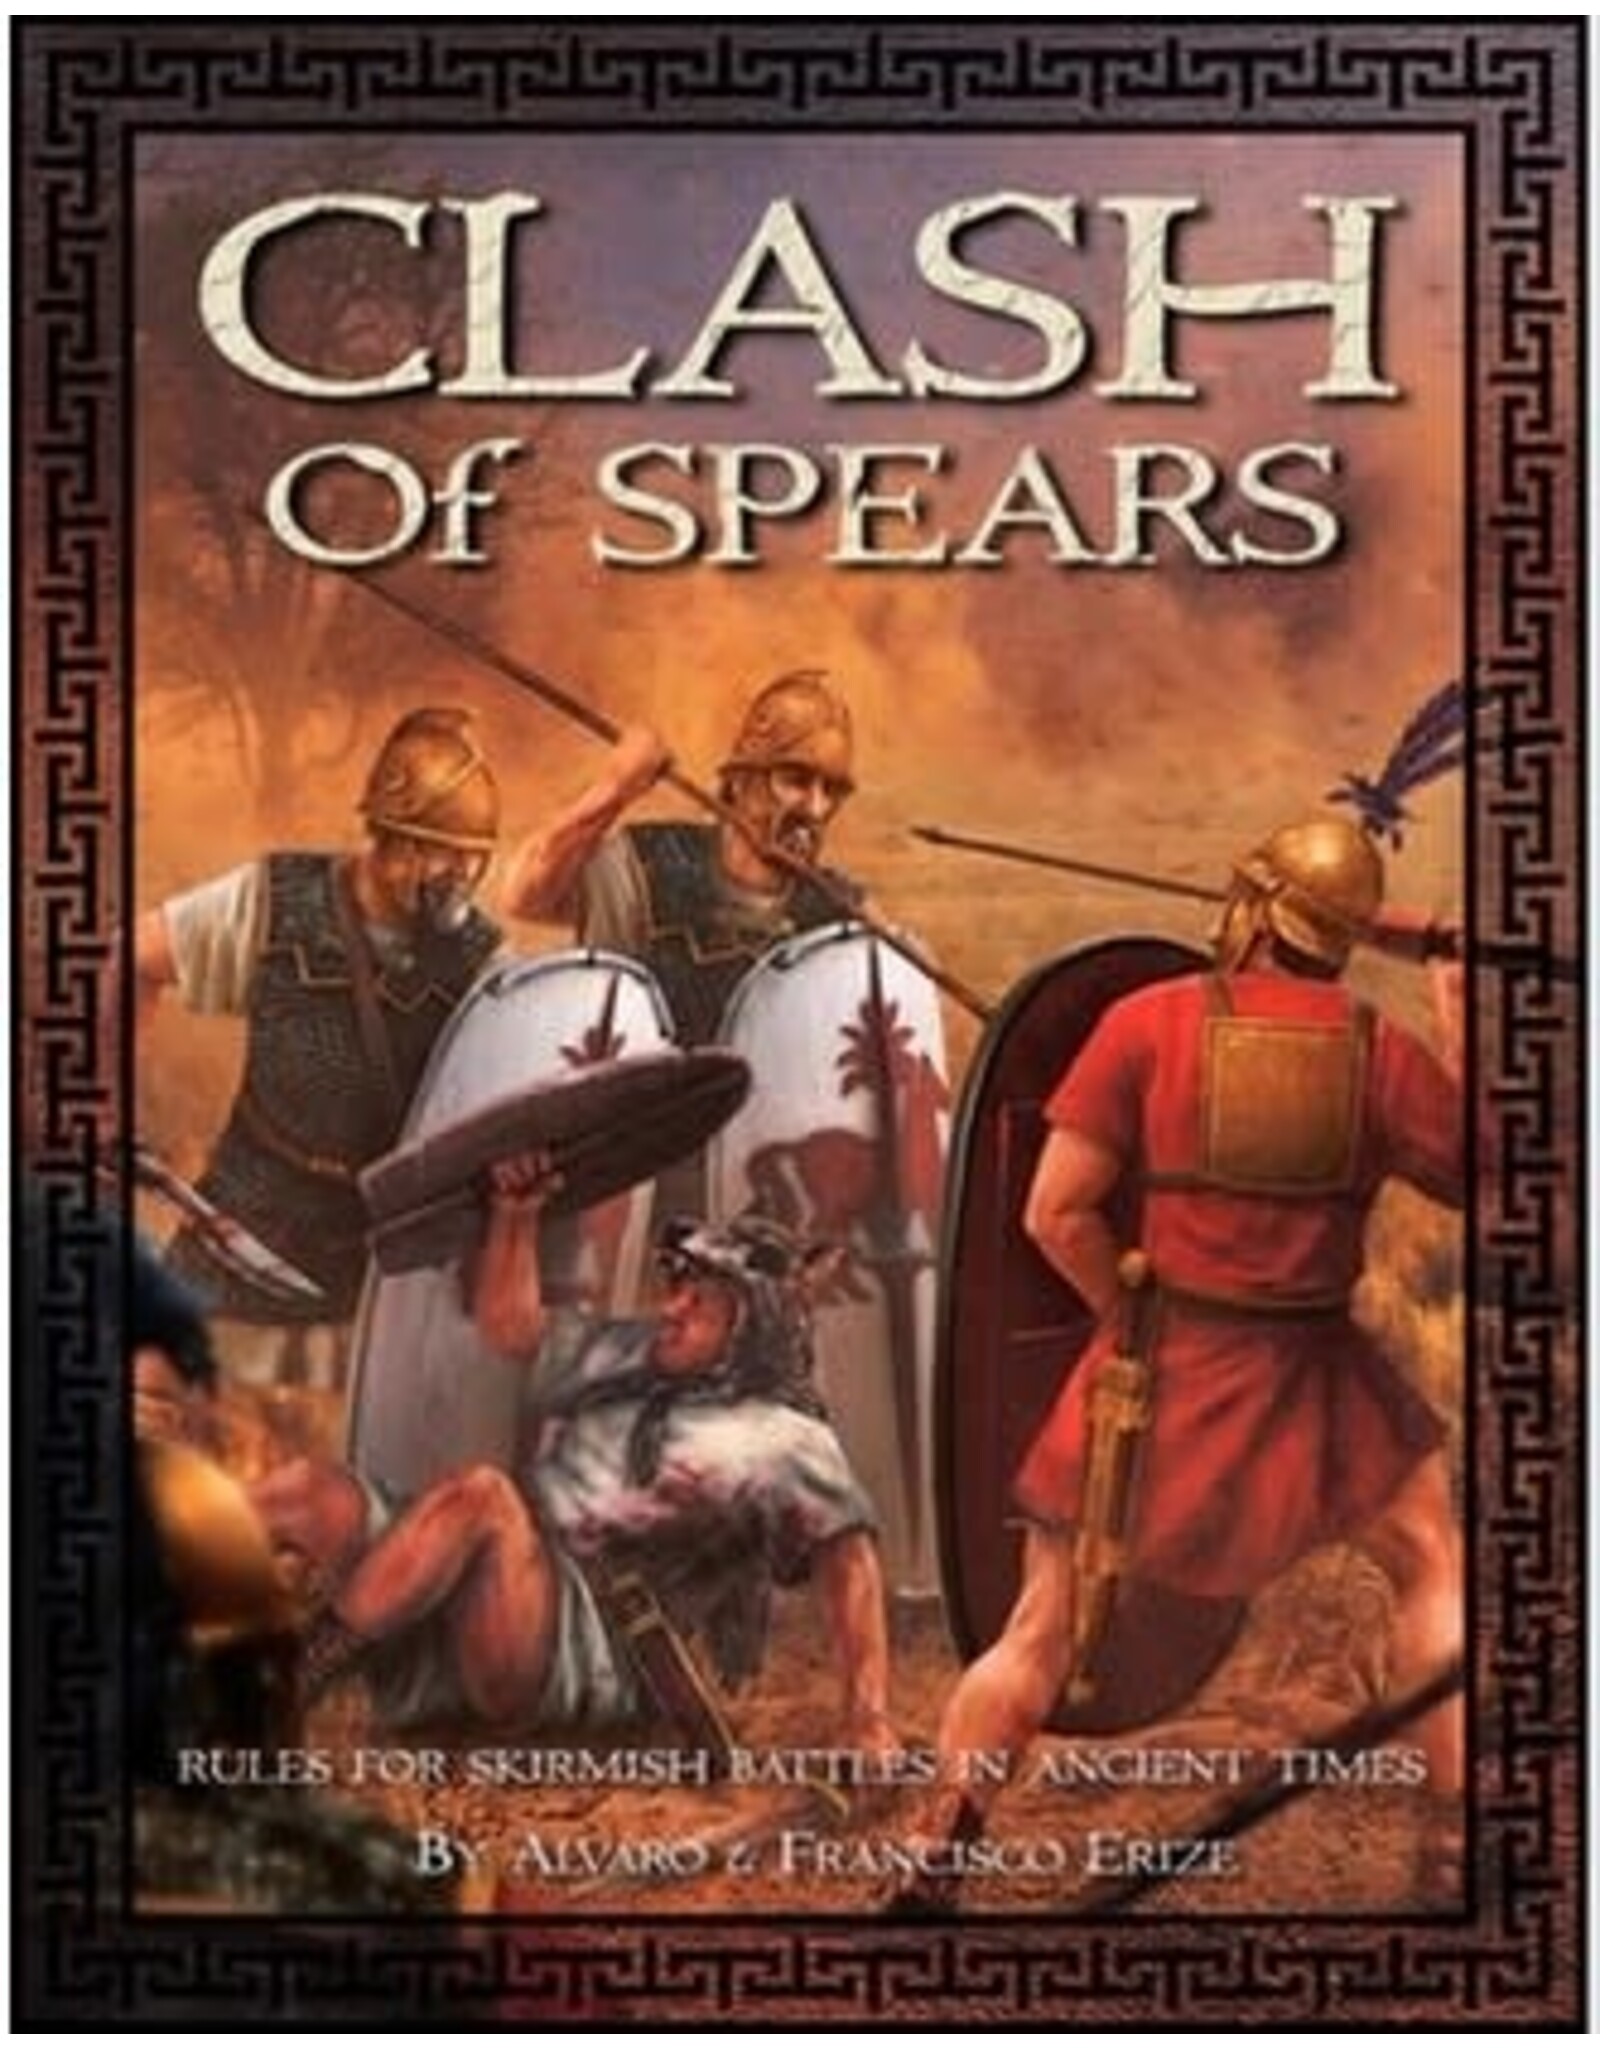 Clash of Spears Rulebook